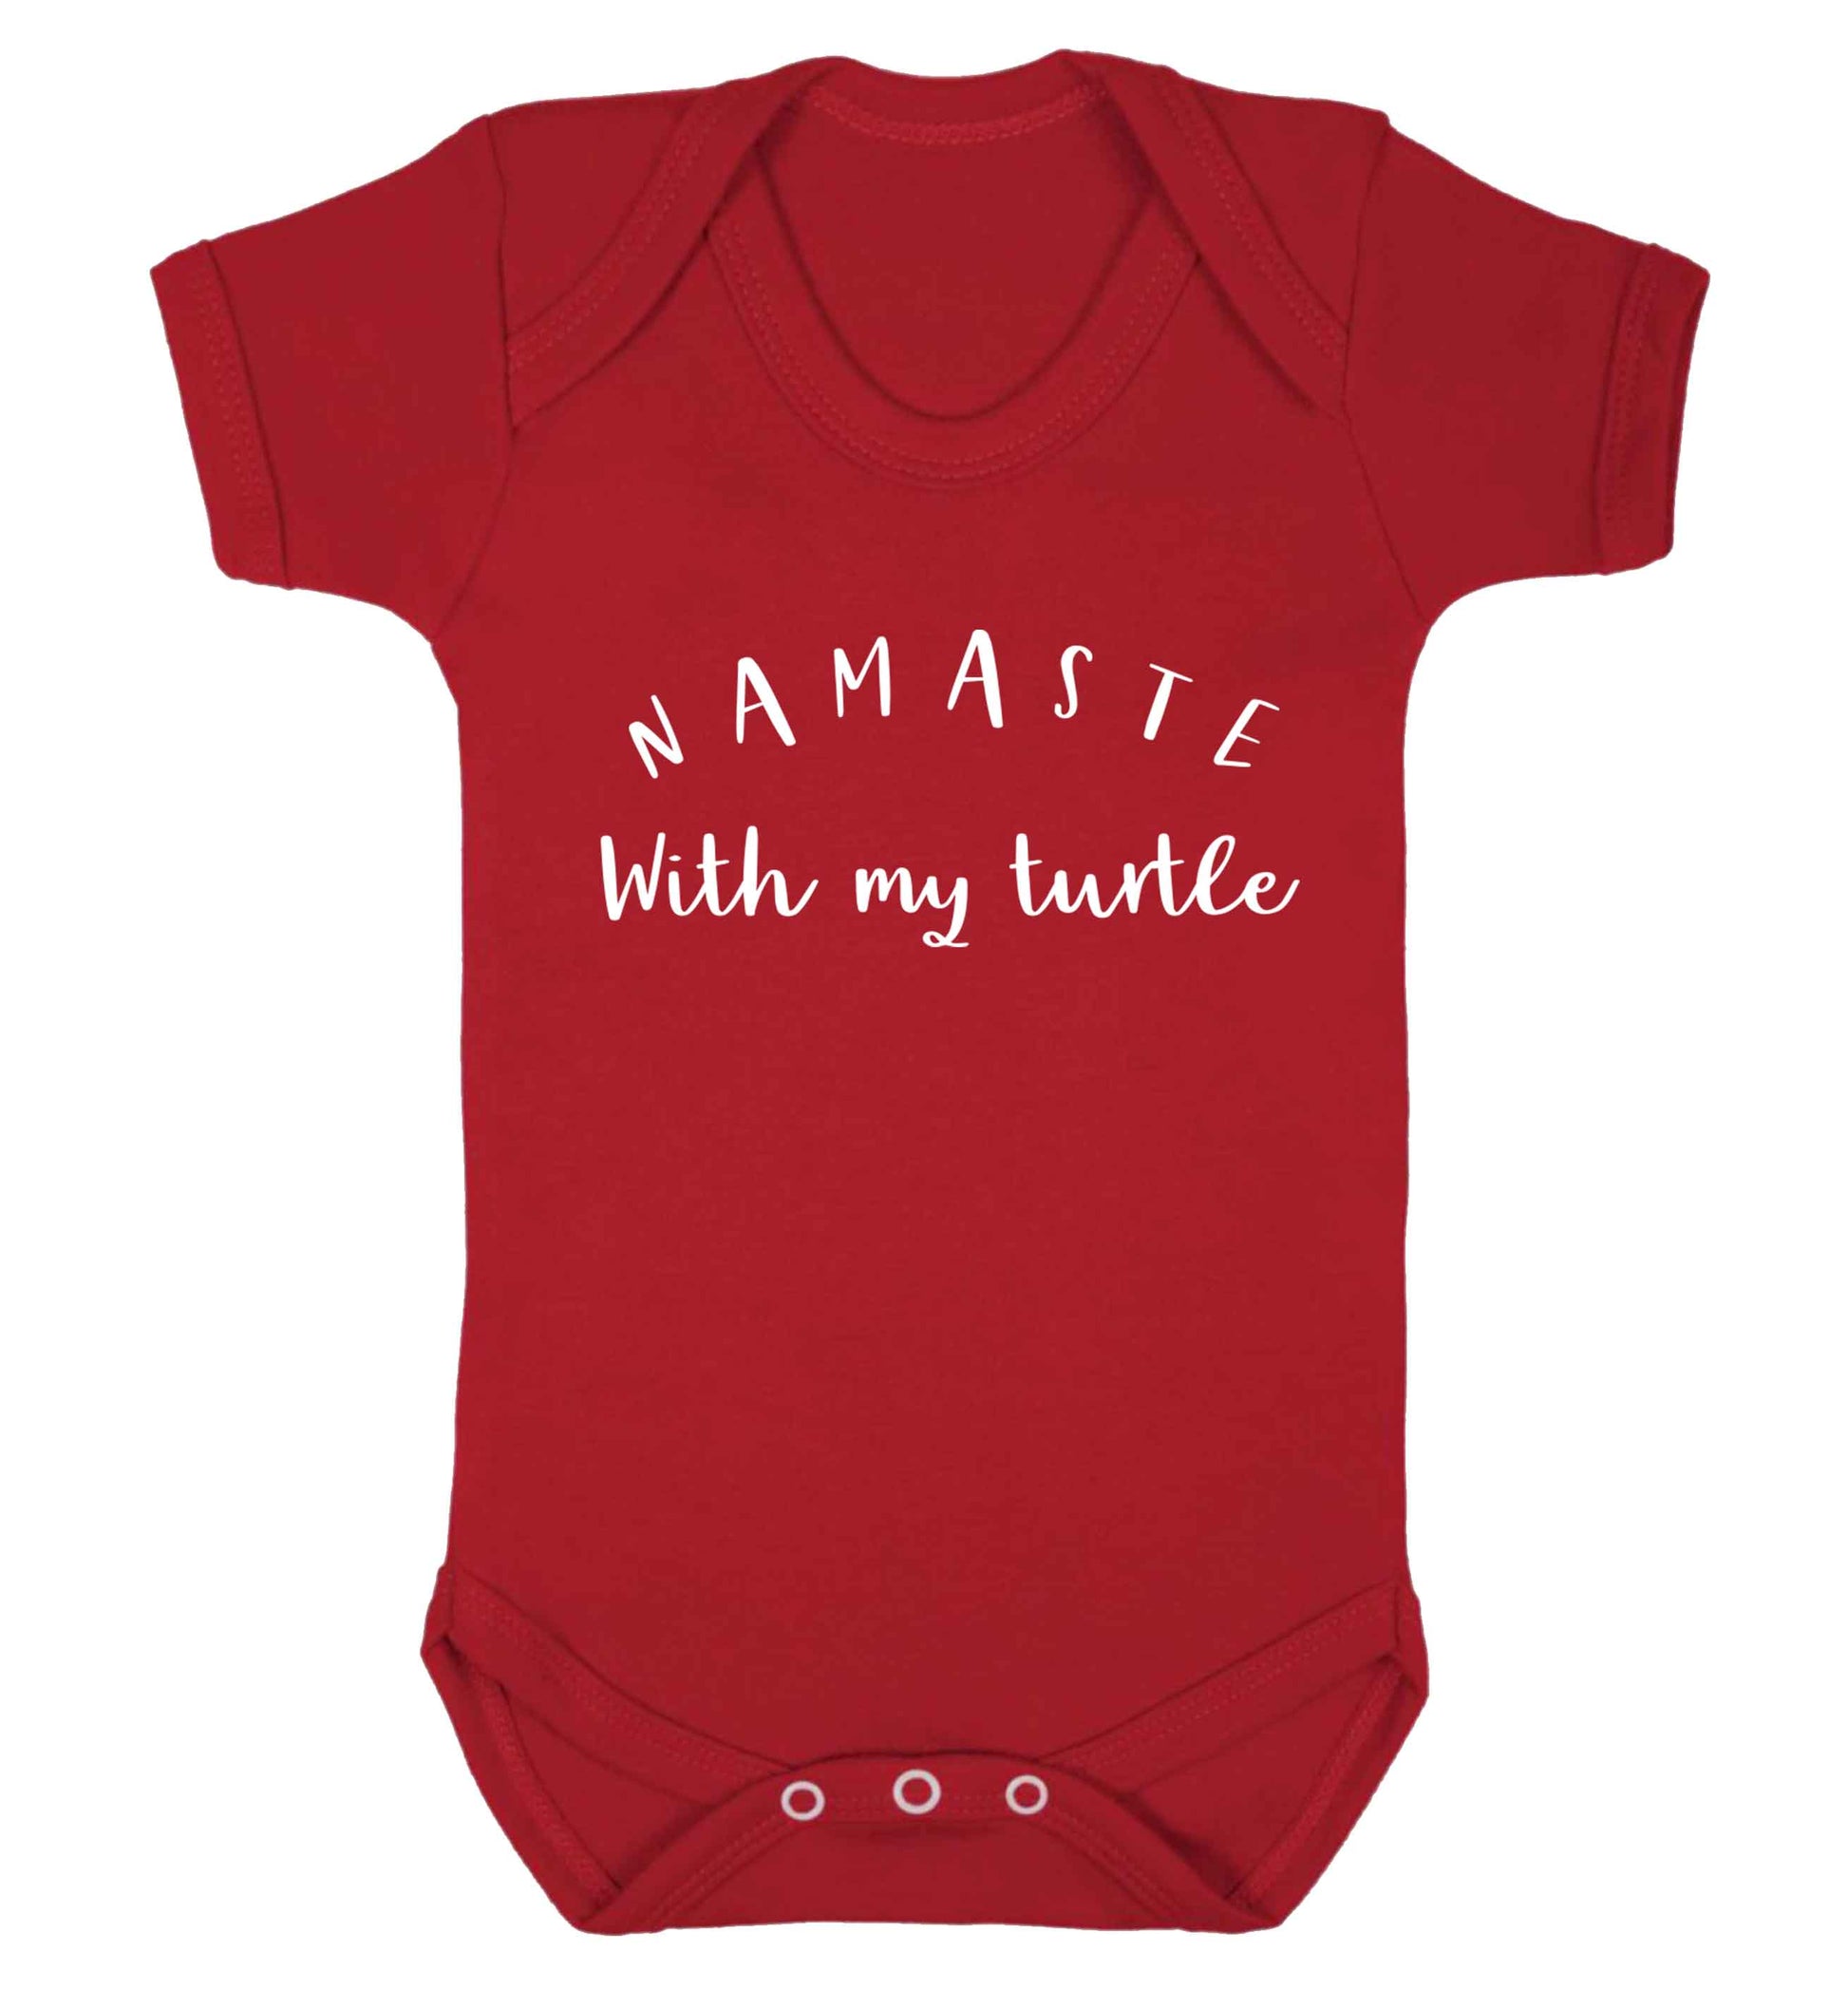 Namaste with my turtle Baby Vest red 18-24 months